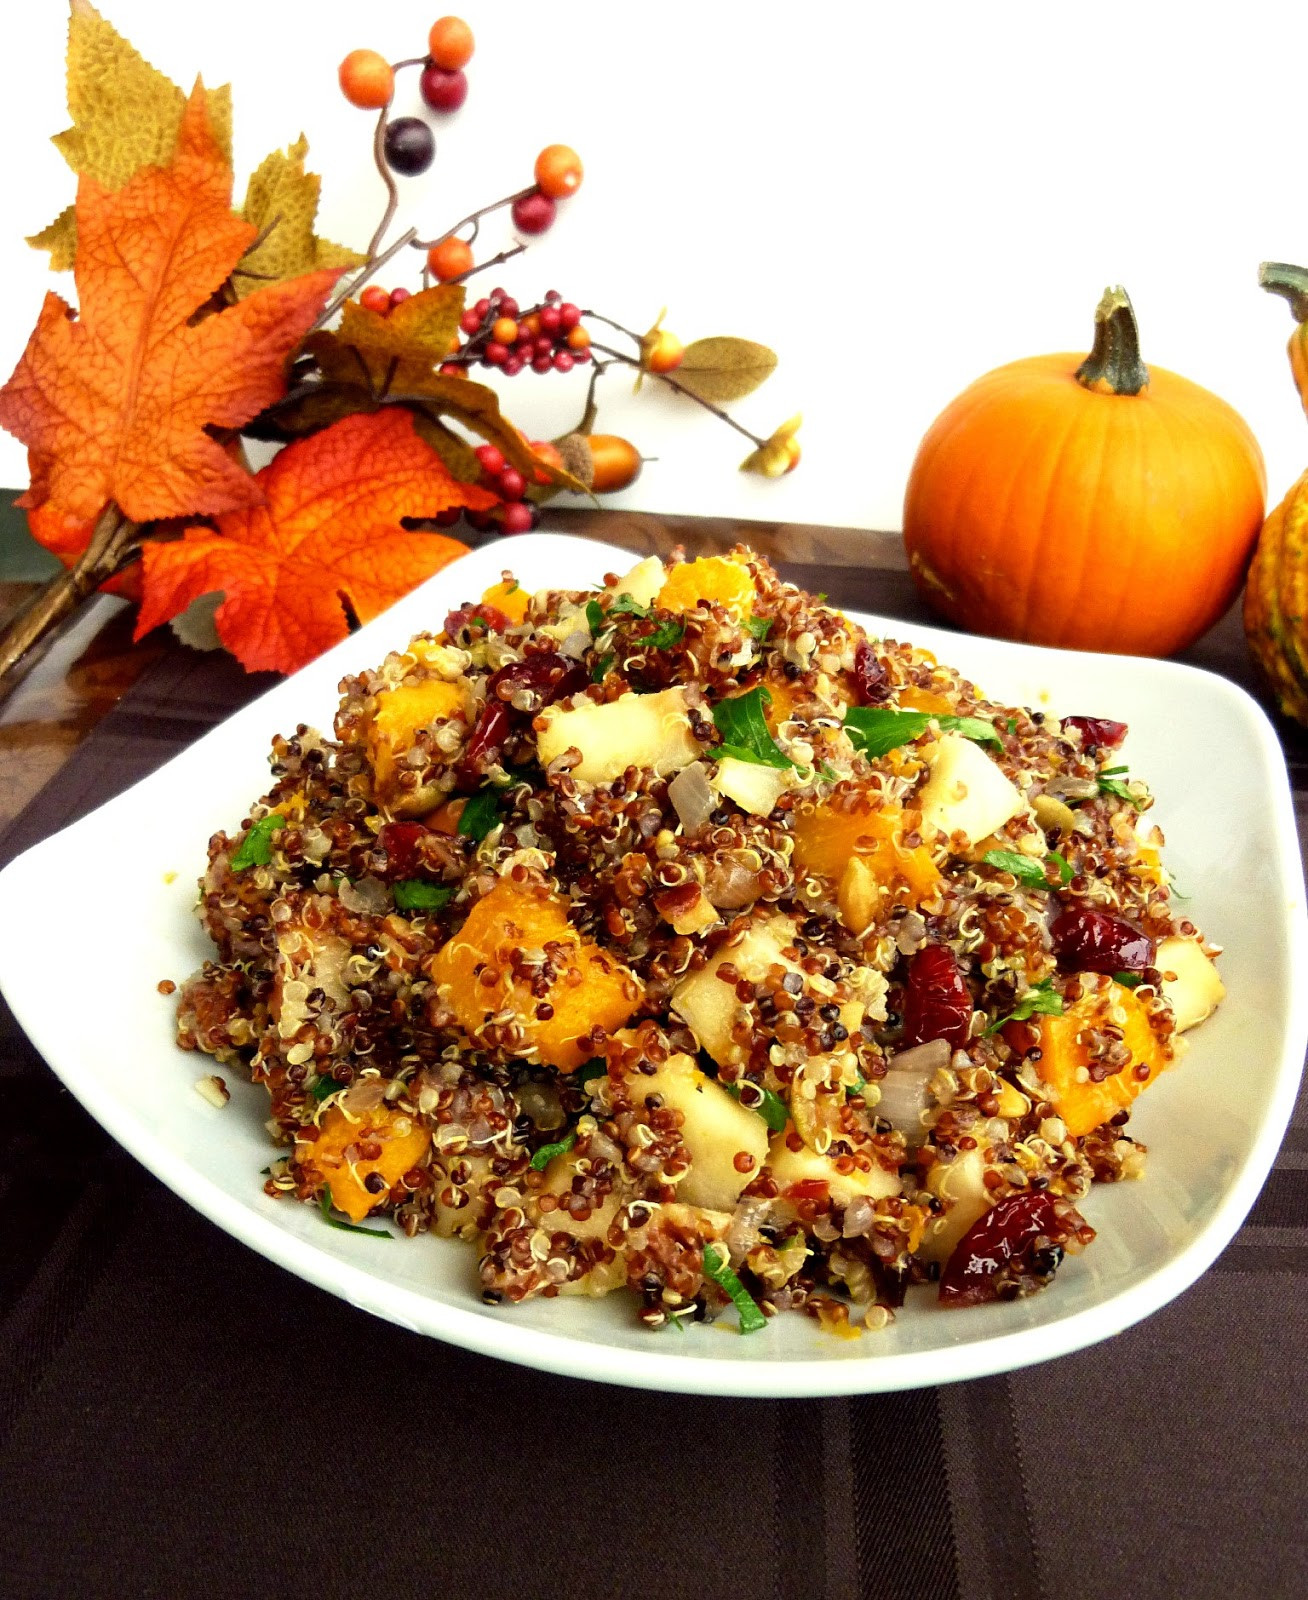 Vegetarian Main Dish For Thanksgiving
 Vanilla & Spice Recipes for a Ve arian Thanksgiving